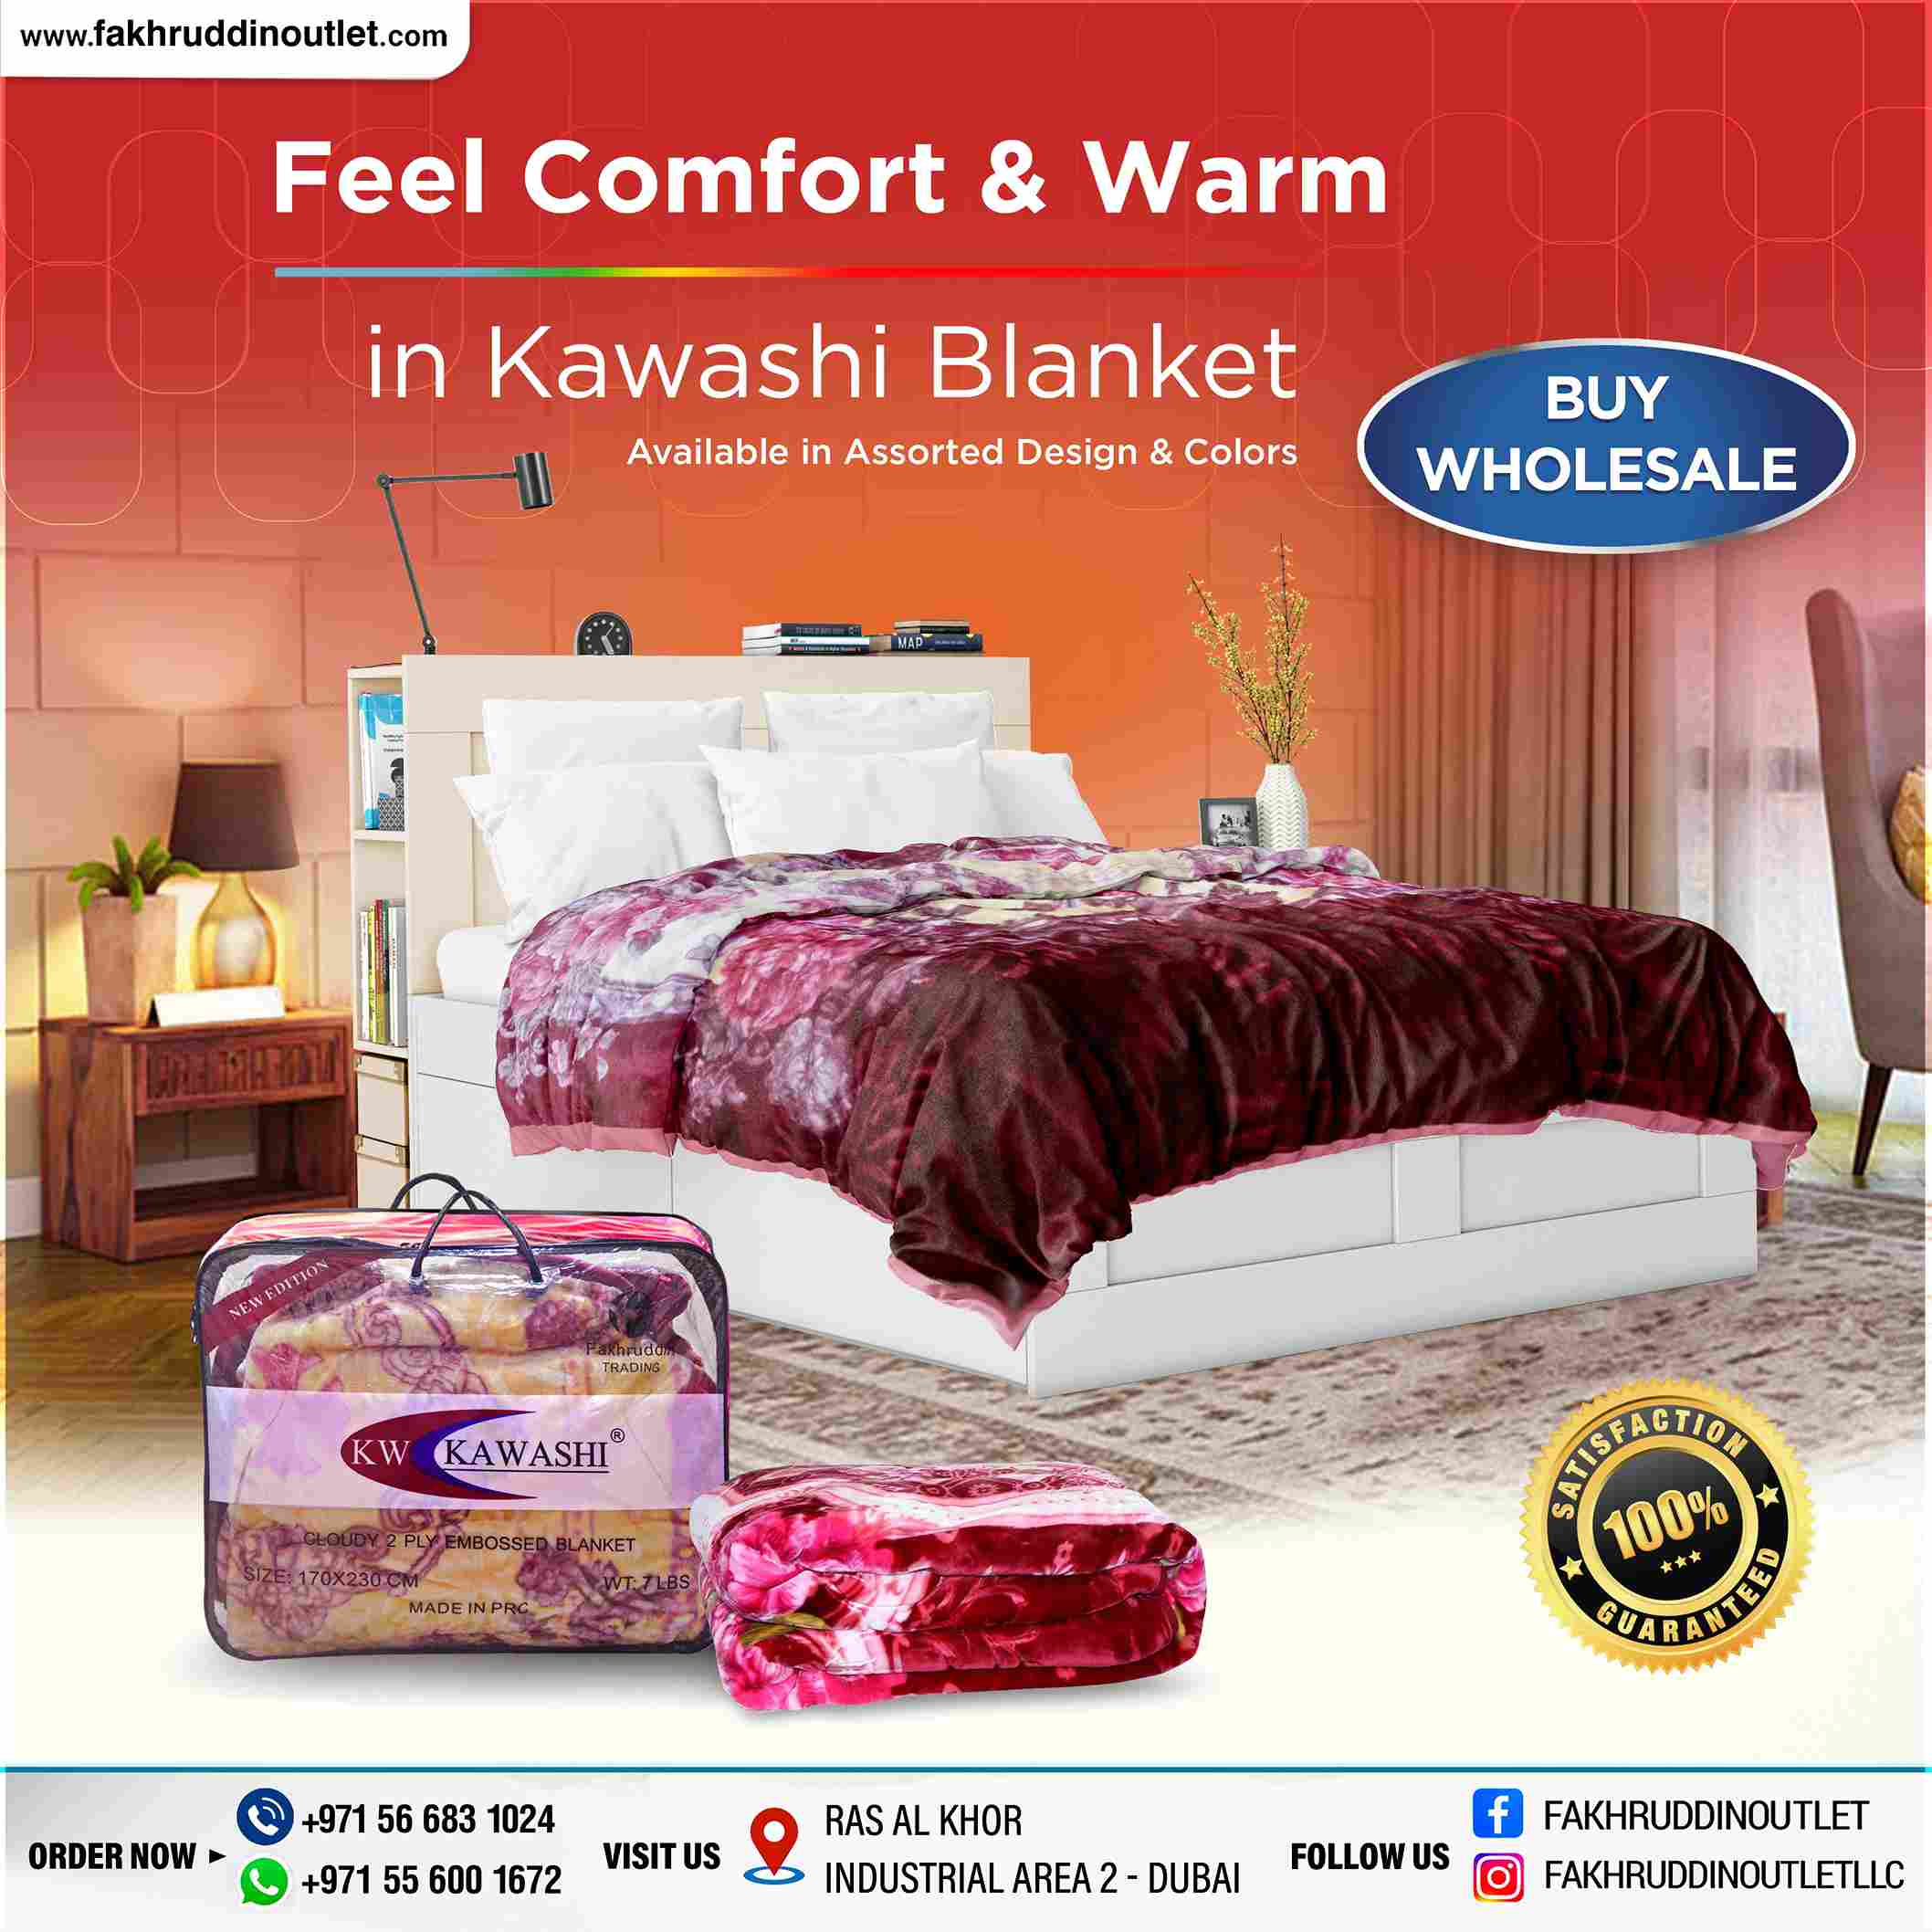 2. Fakhruddin-Outlet-Buywholesale-Retail-Blankets.jpg